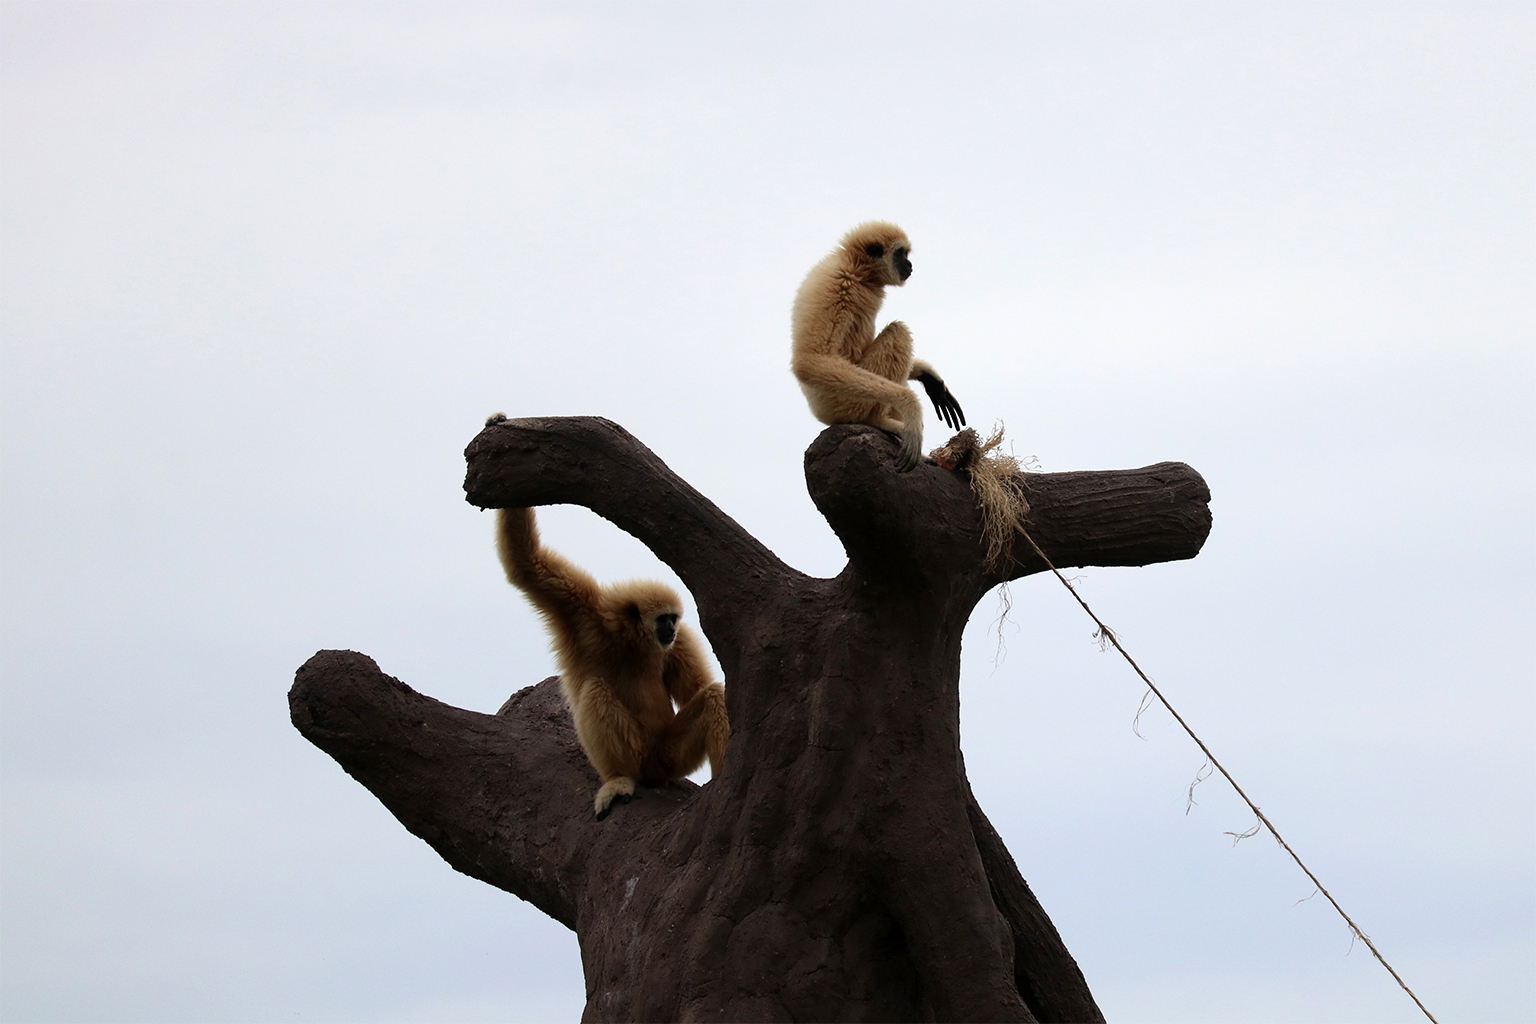 Two gibbons at the Wildlife Friends Foundation Thailand